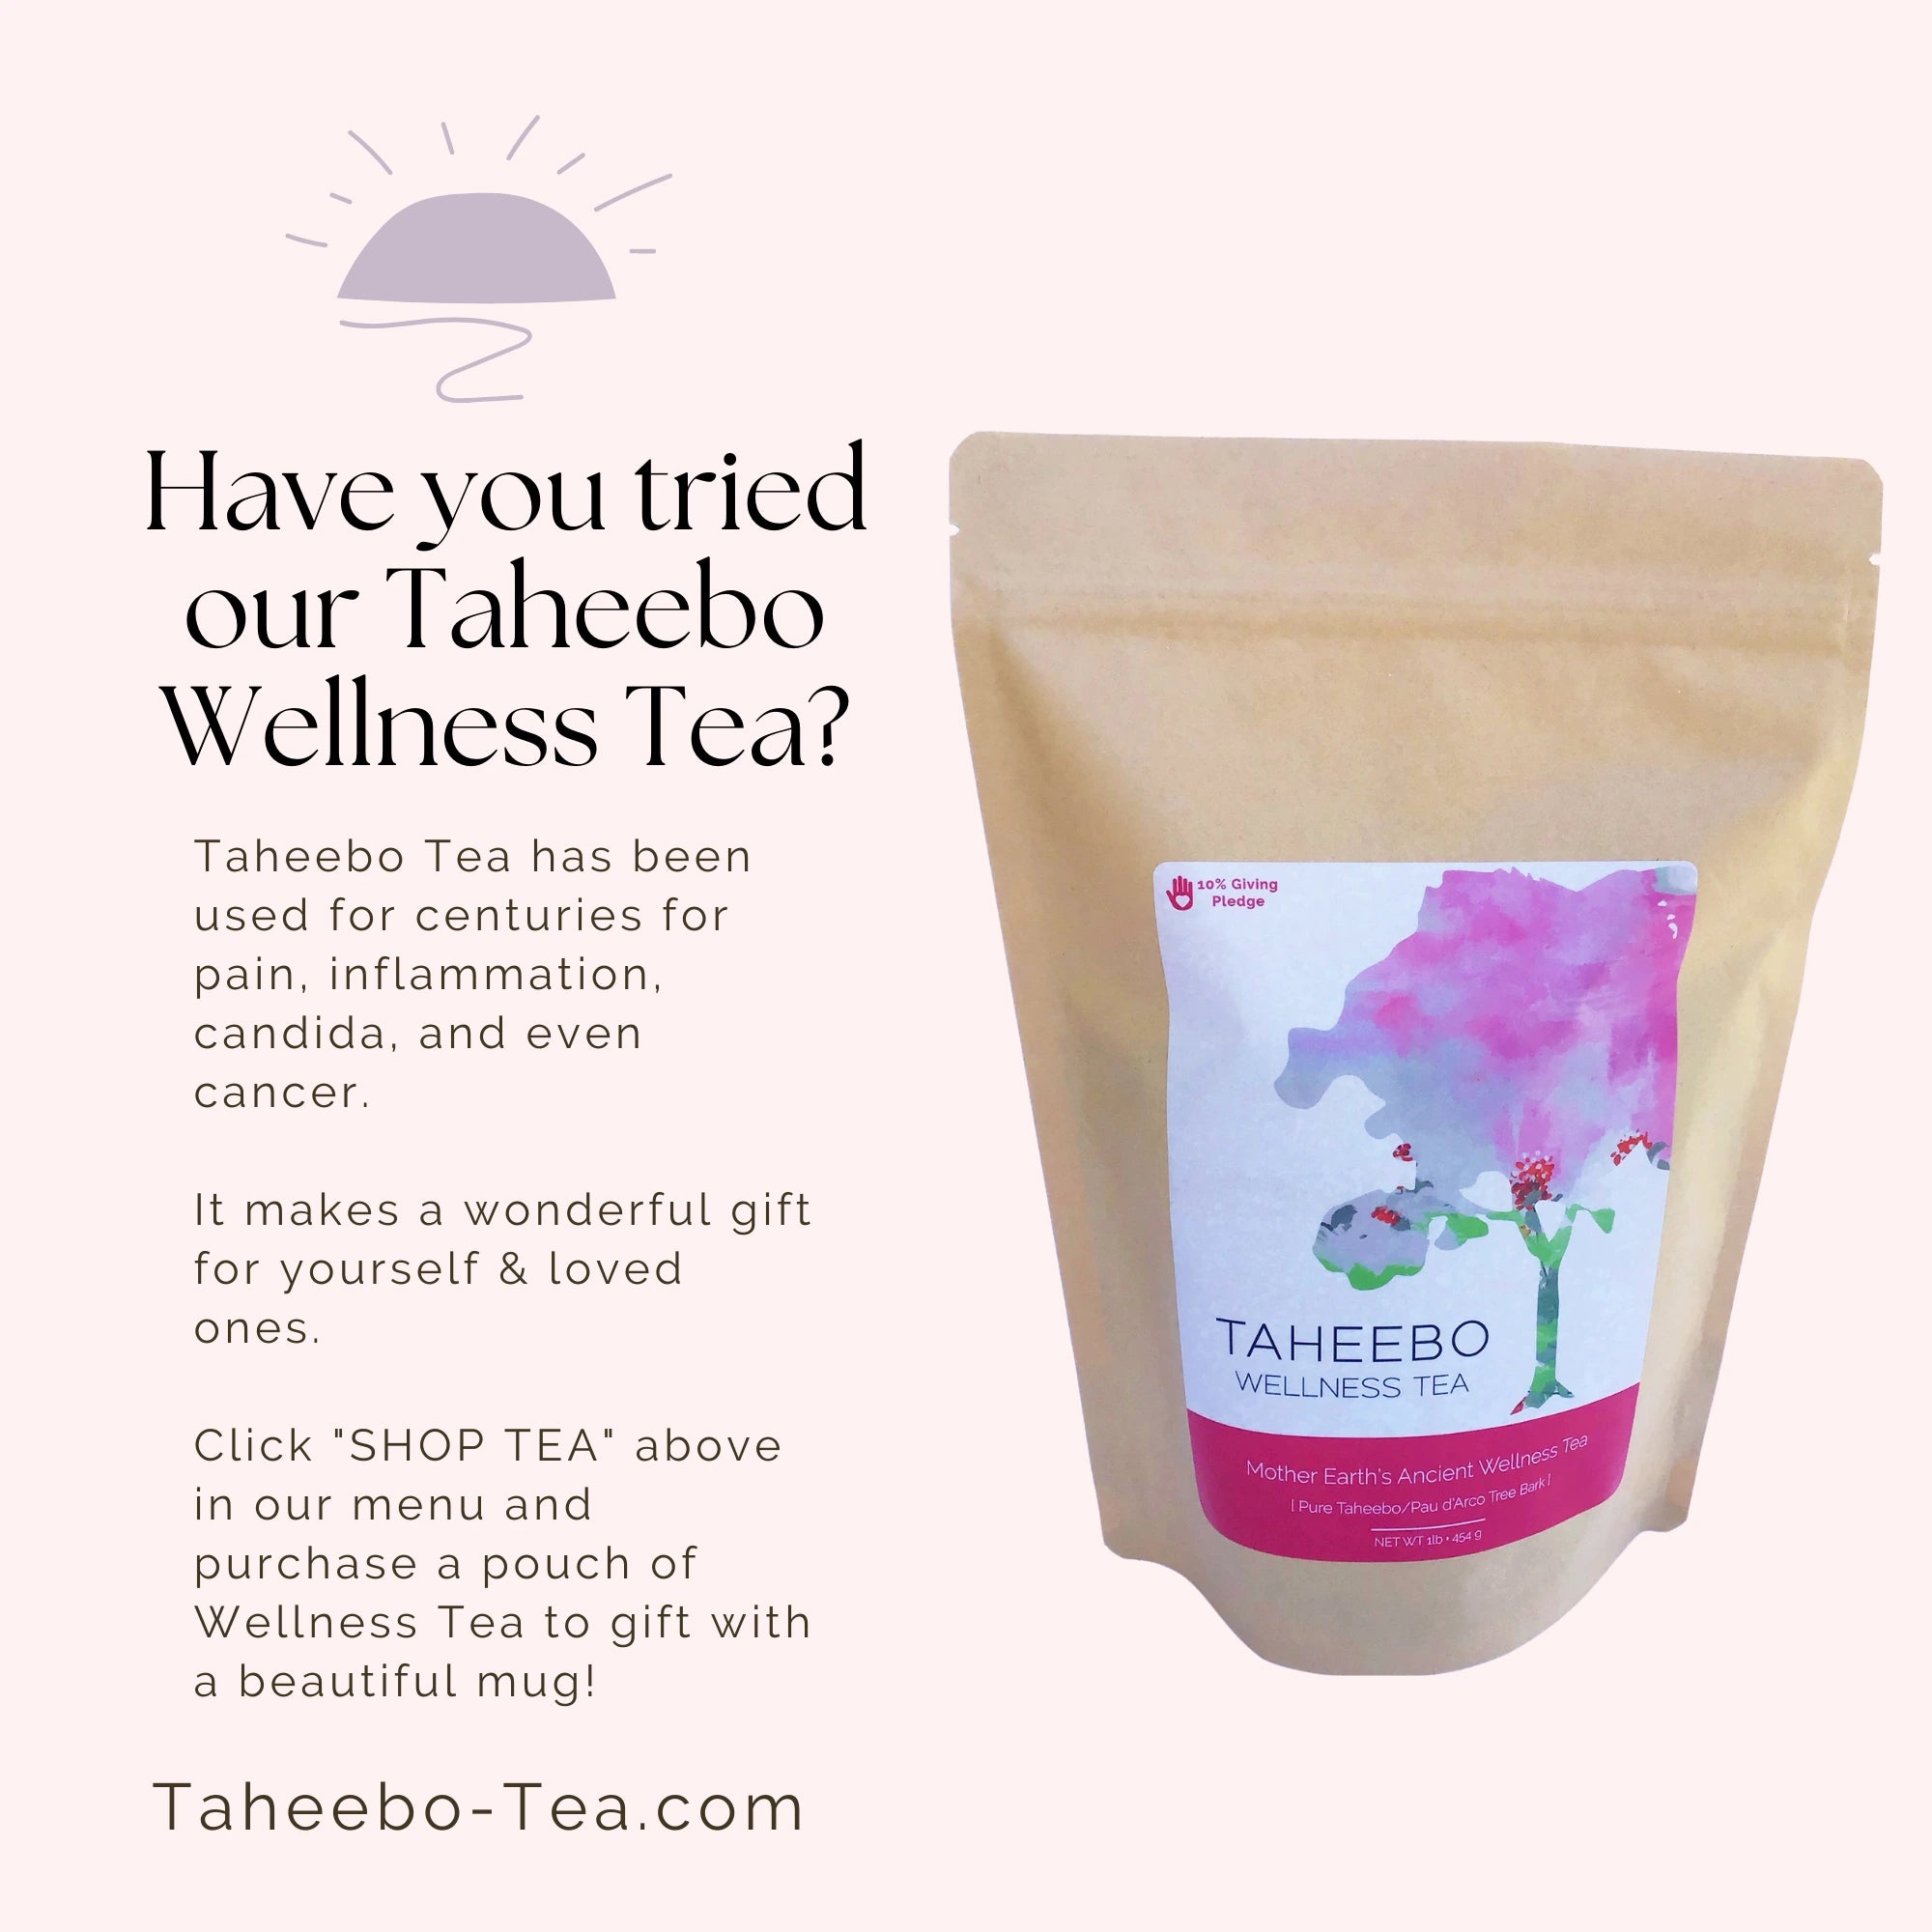 Have you experienced the health benefits of Taheebo Wellness Tea yet?